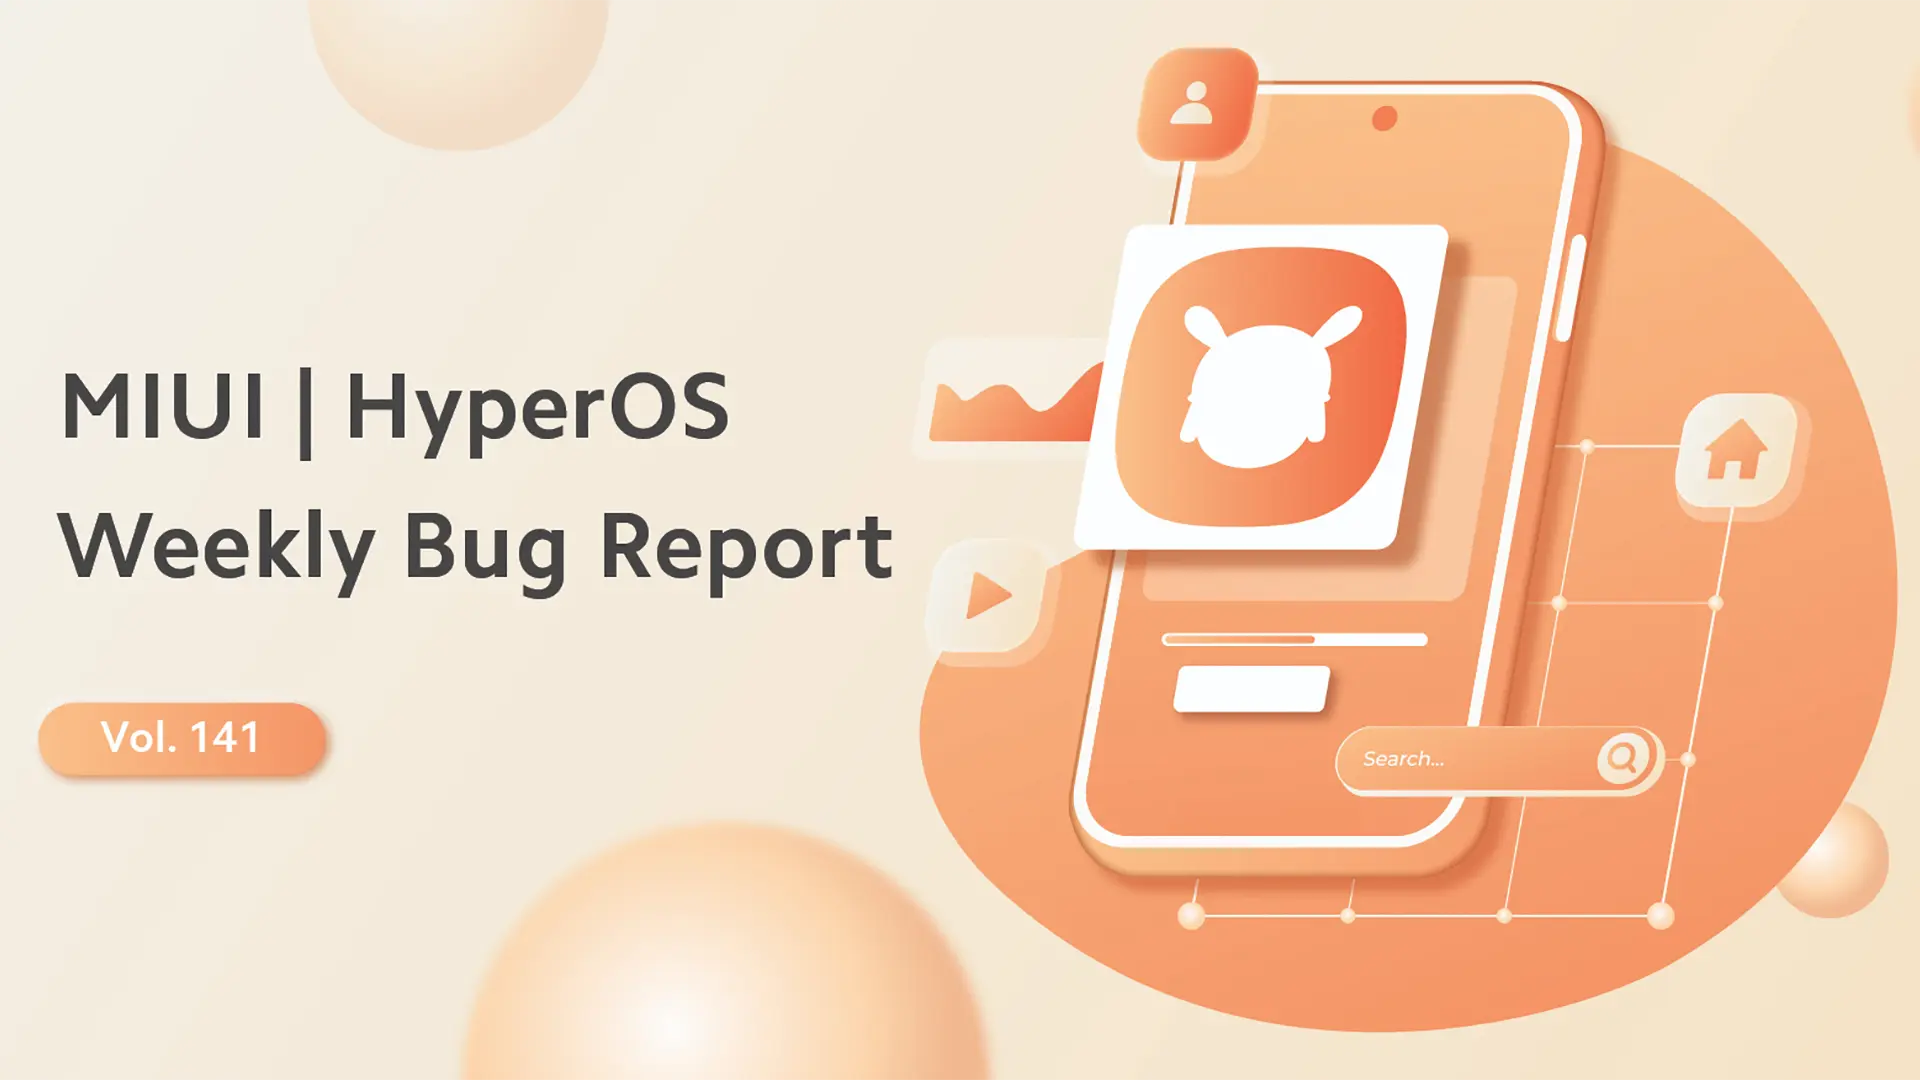 Weekly bug report for MIUI and HyperOS